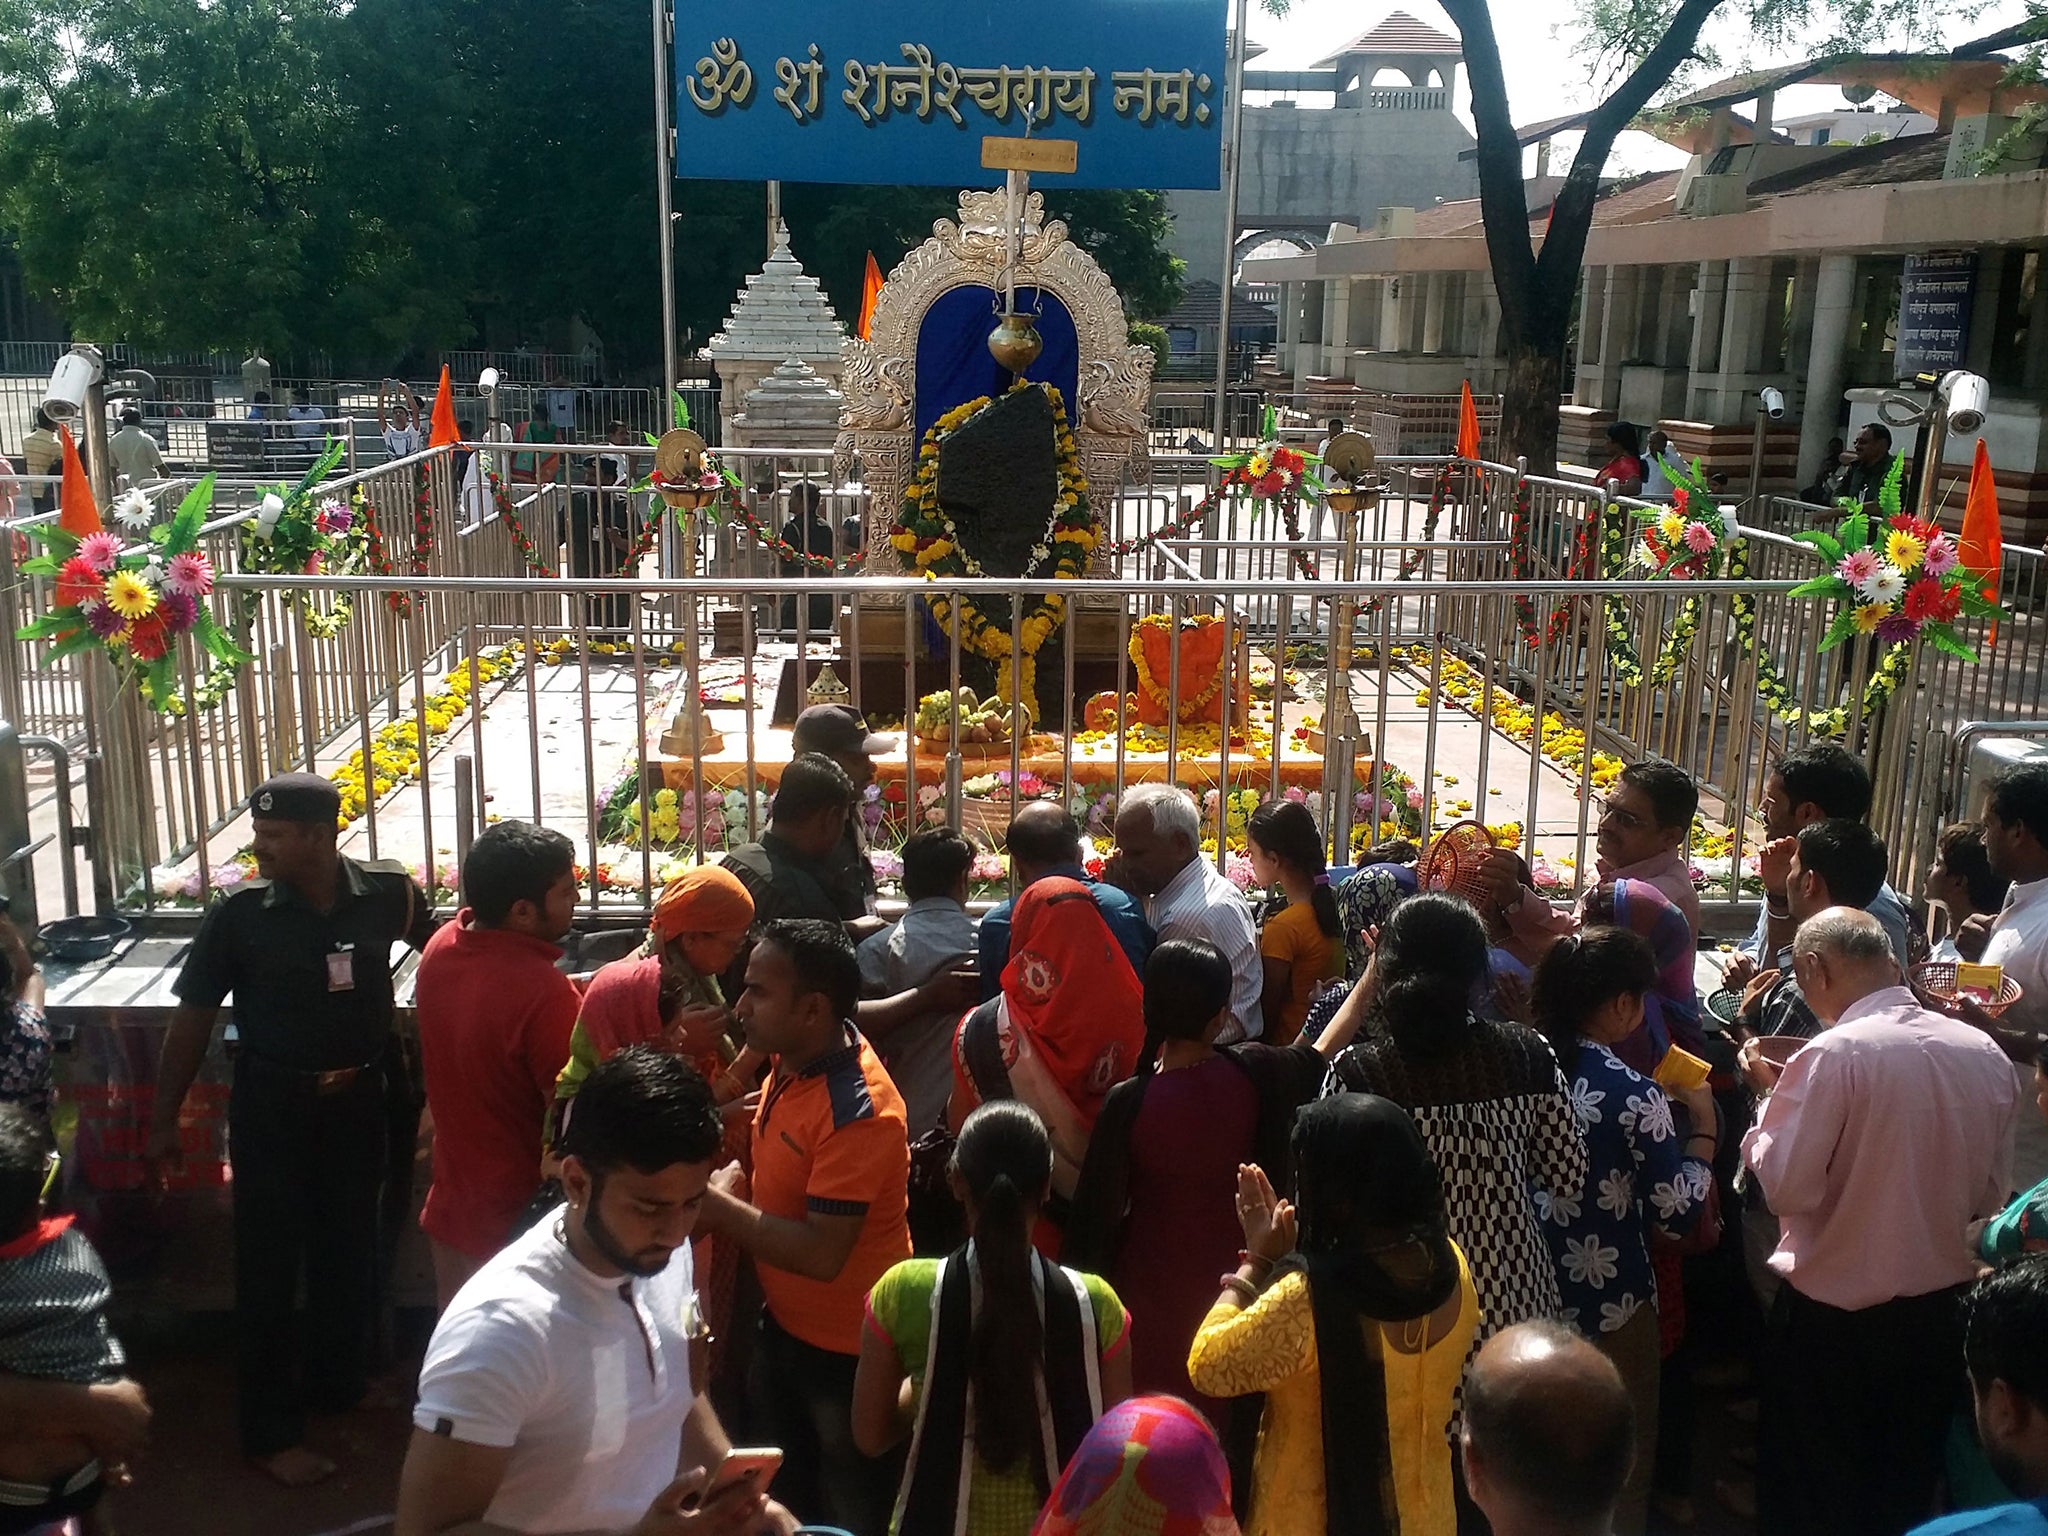 Villagers block women activists from entering the Shani Shingnapur temple